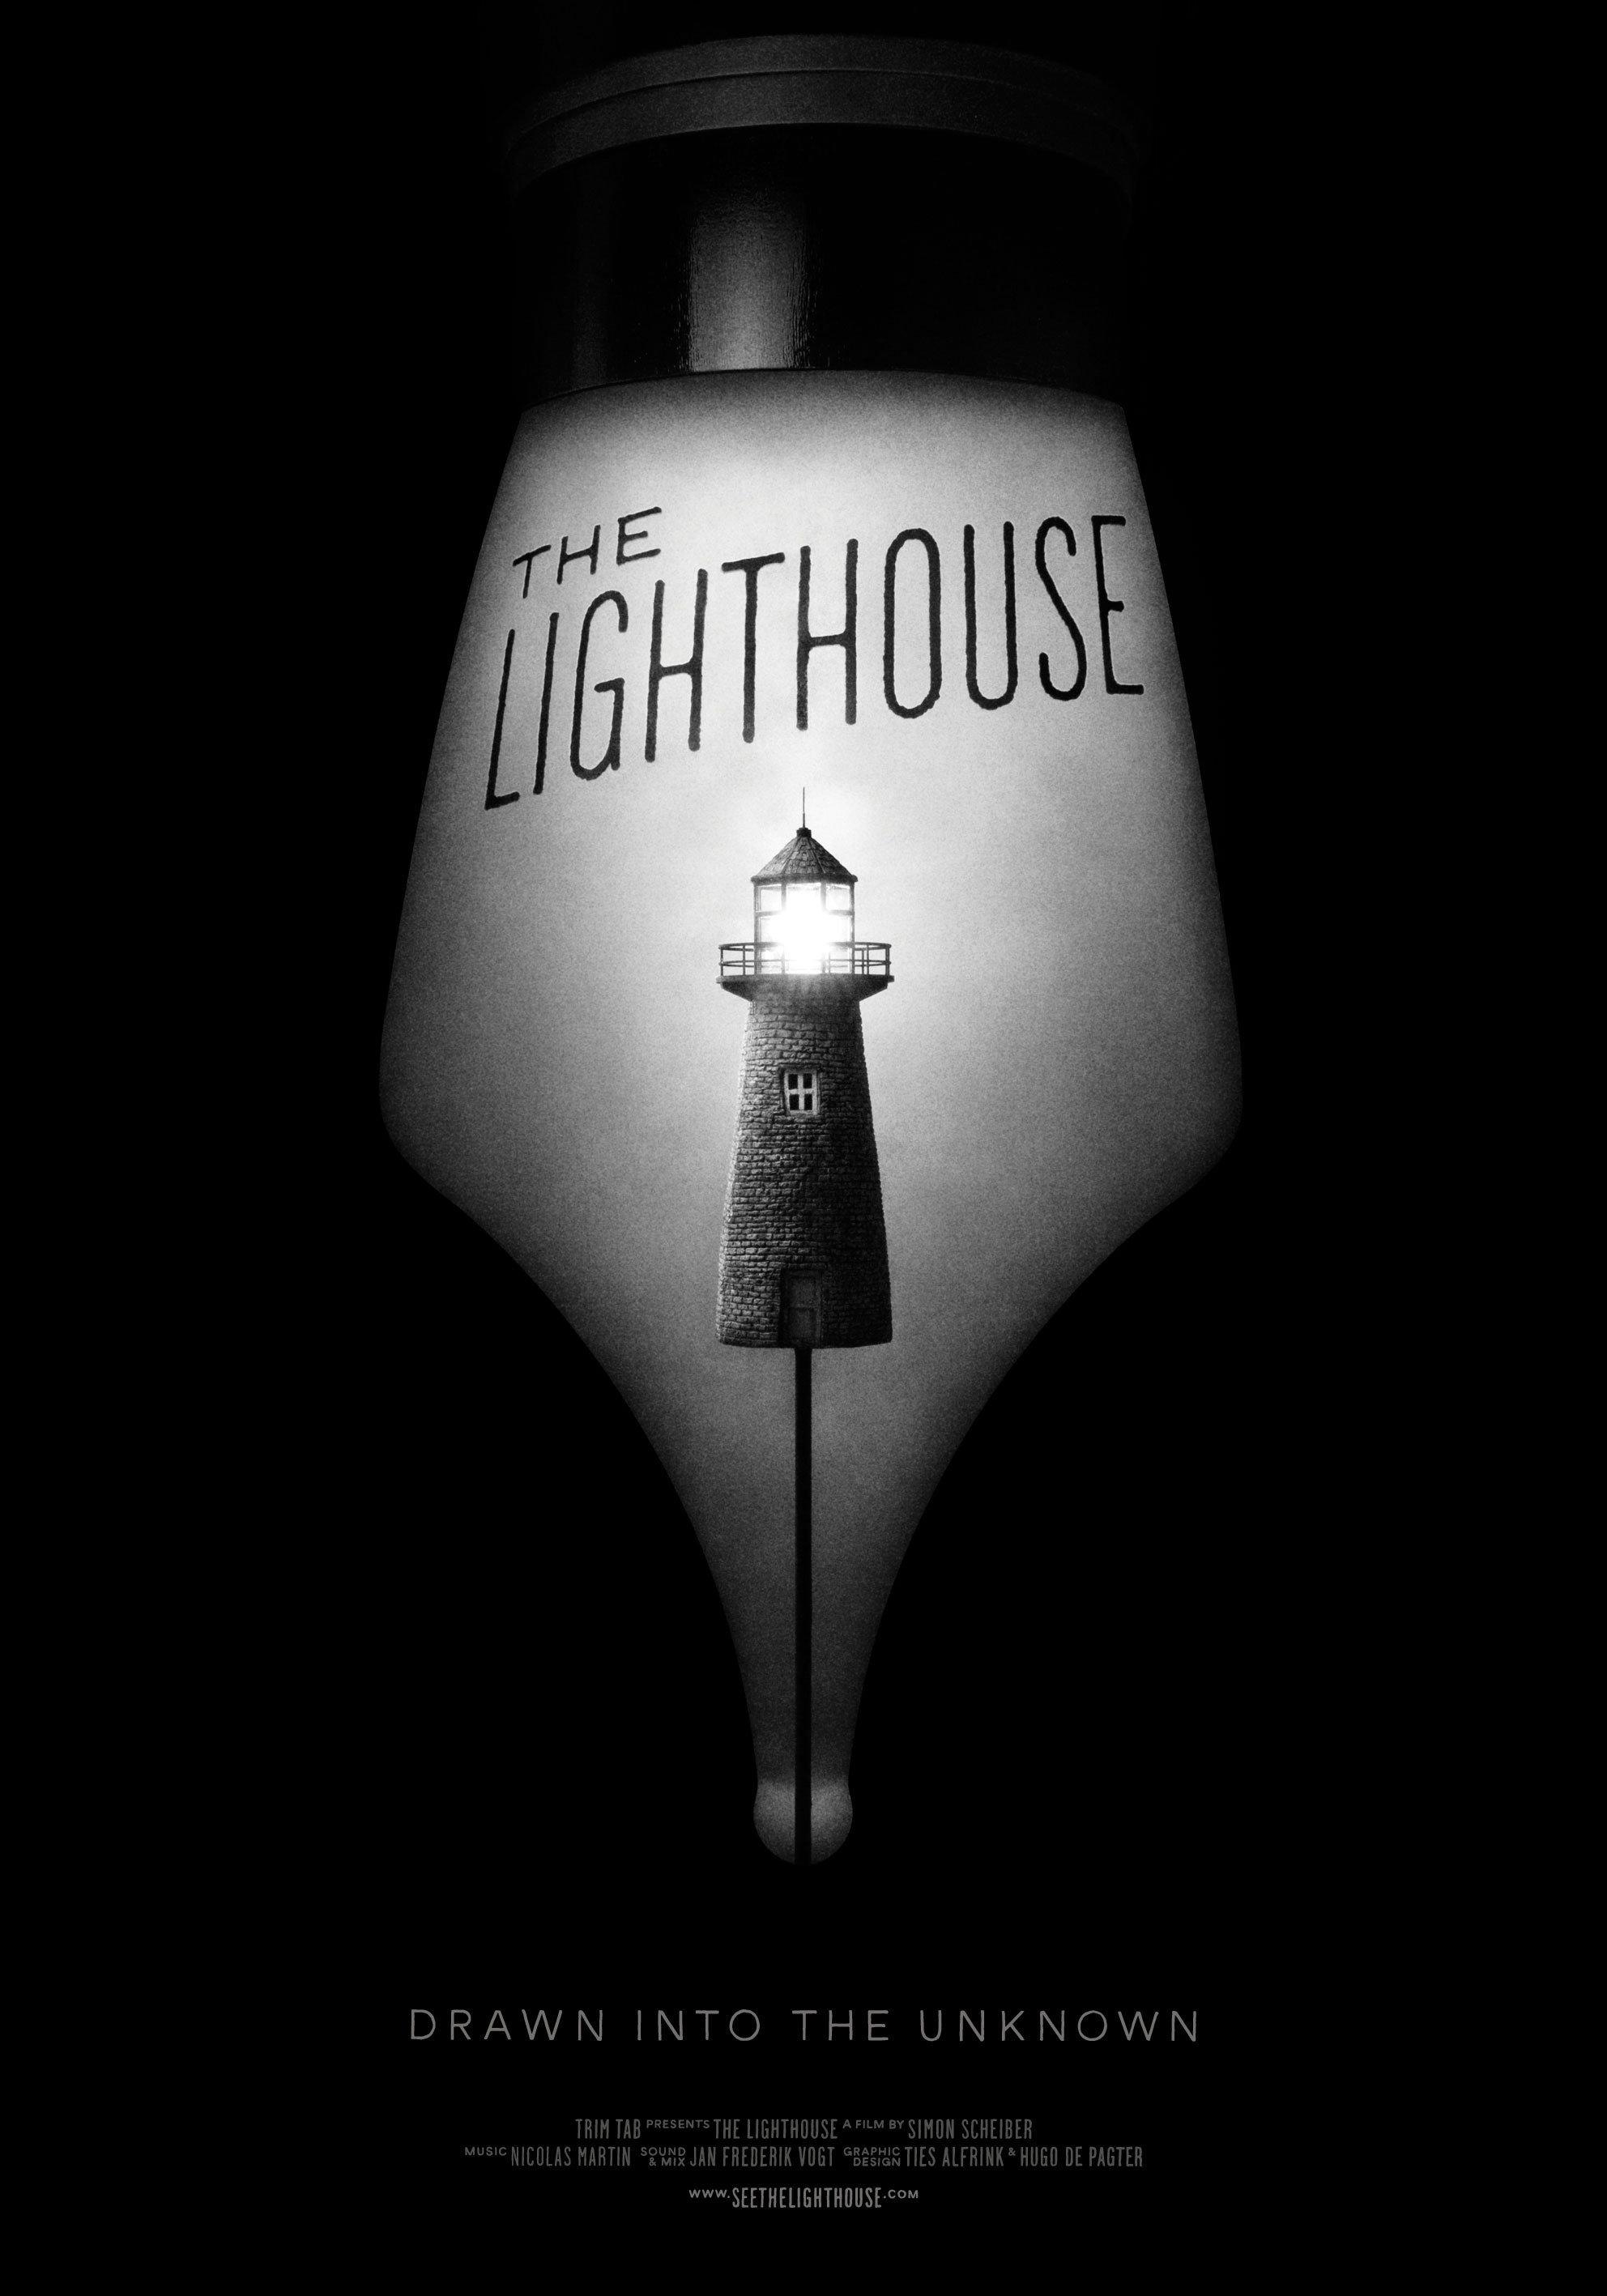 The Lighthouse (2016)